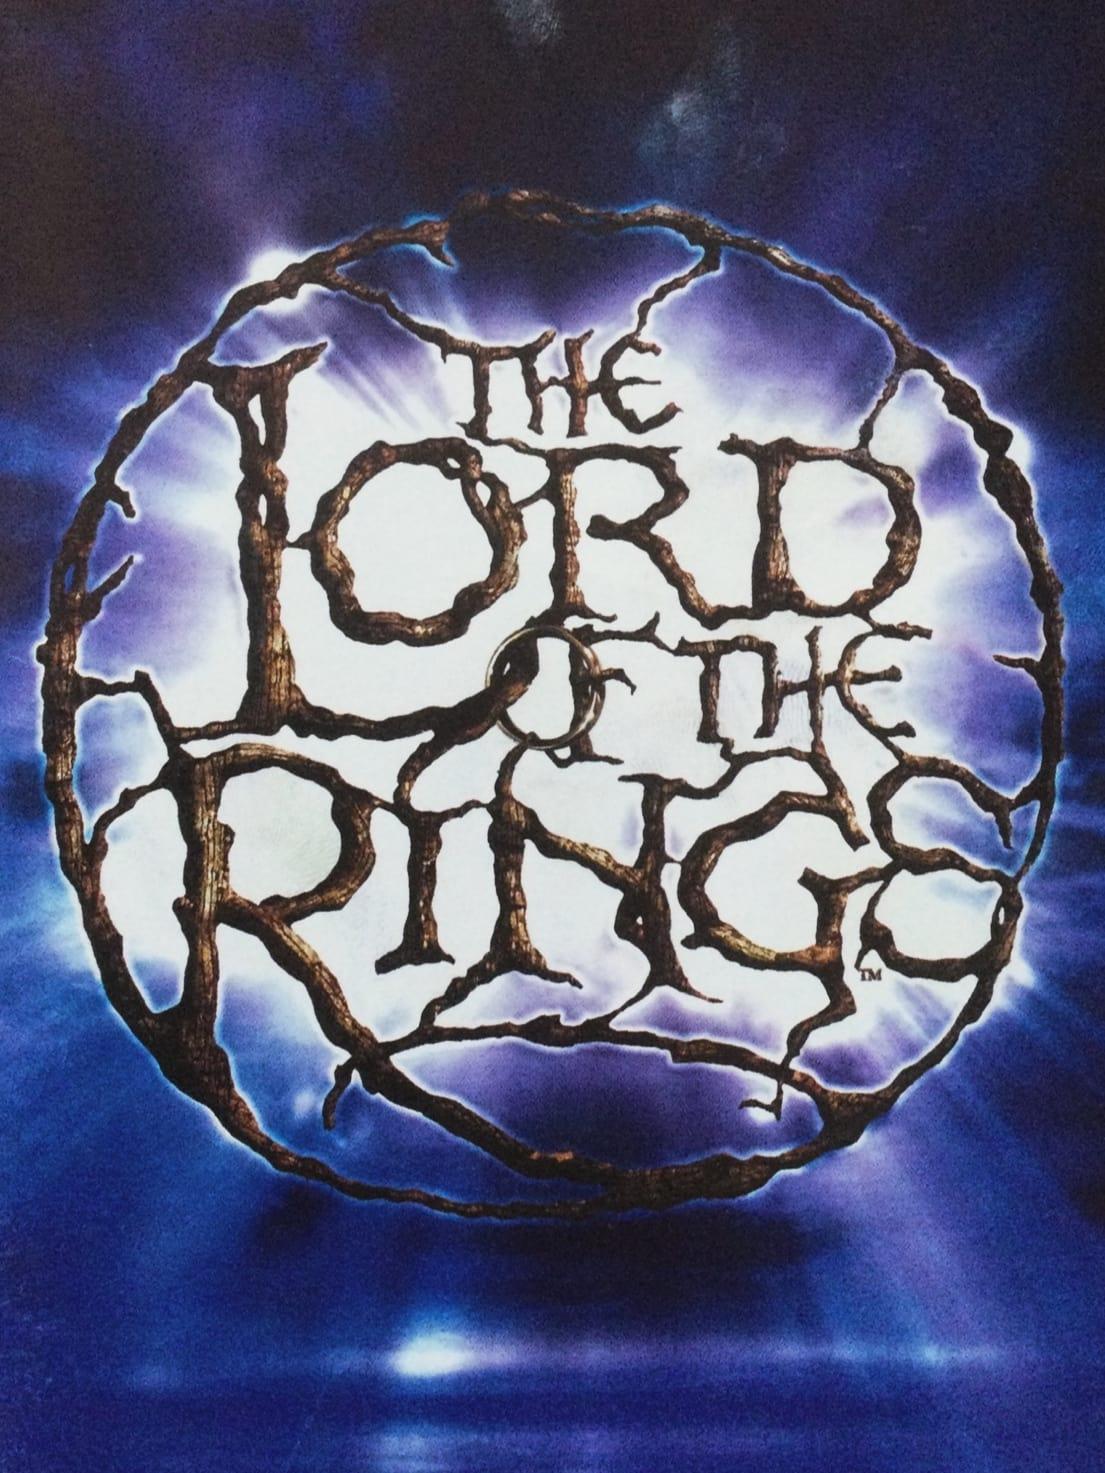 The Lord of the Rings the Musical - Original London Production - Promotional Documentary poster